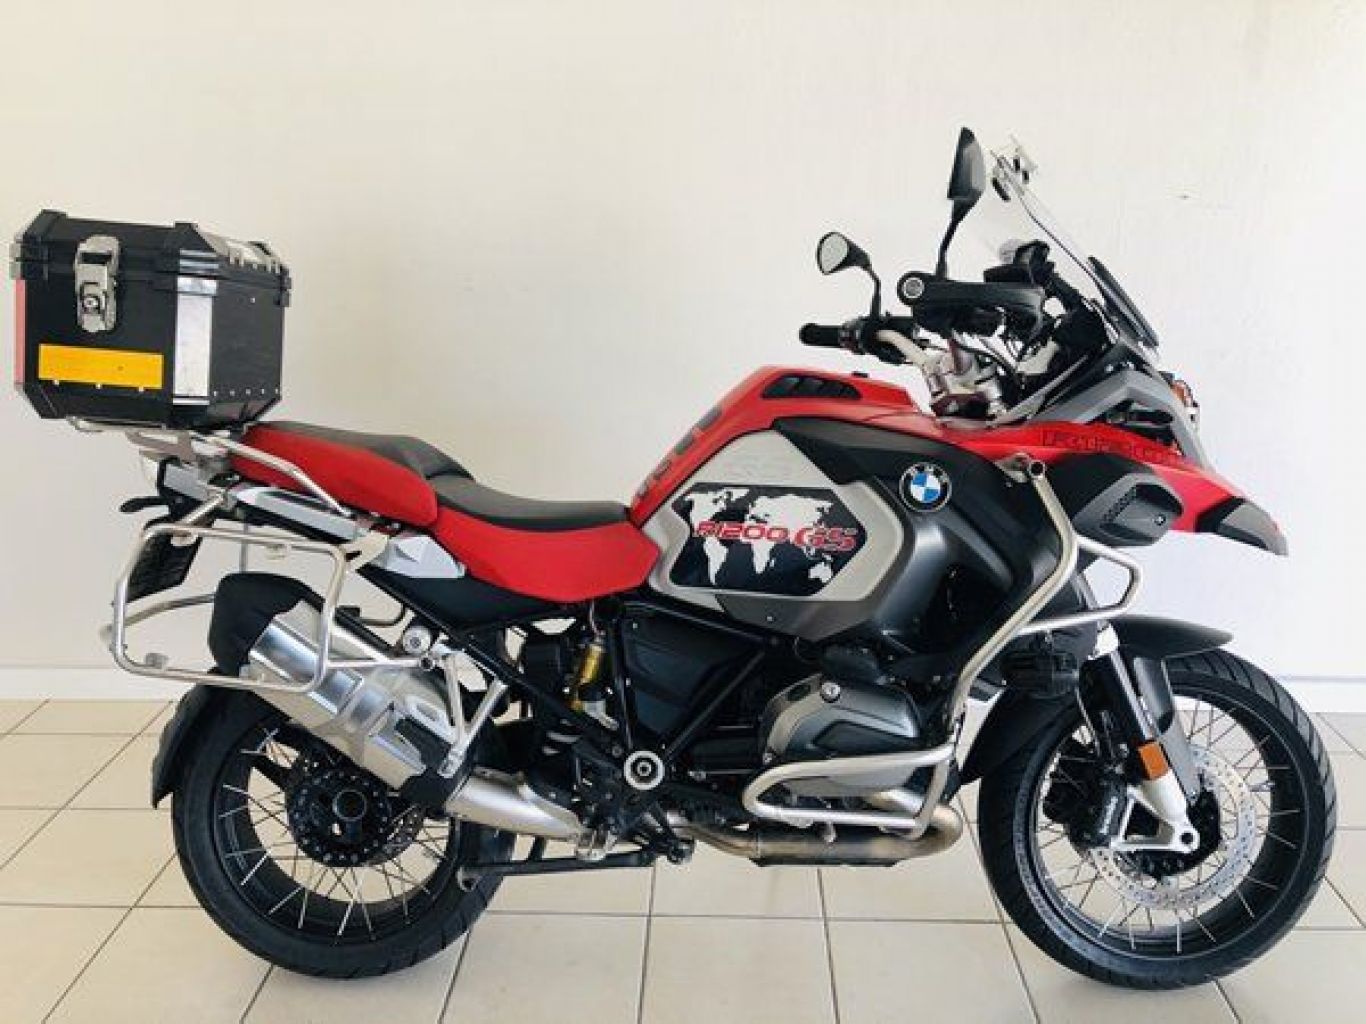 Used BMW R1200GS Adventure for sale